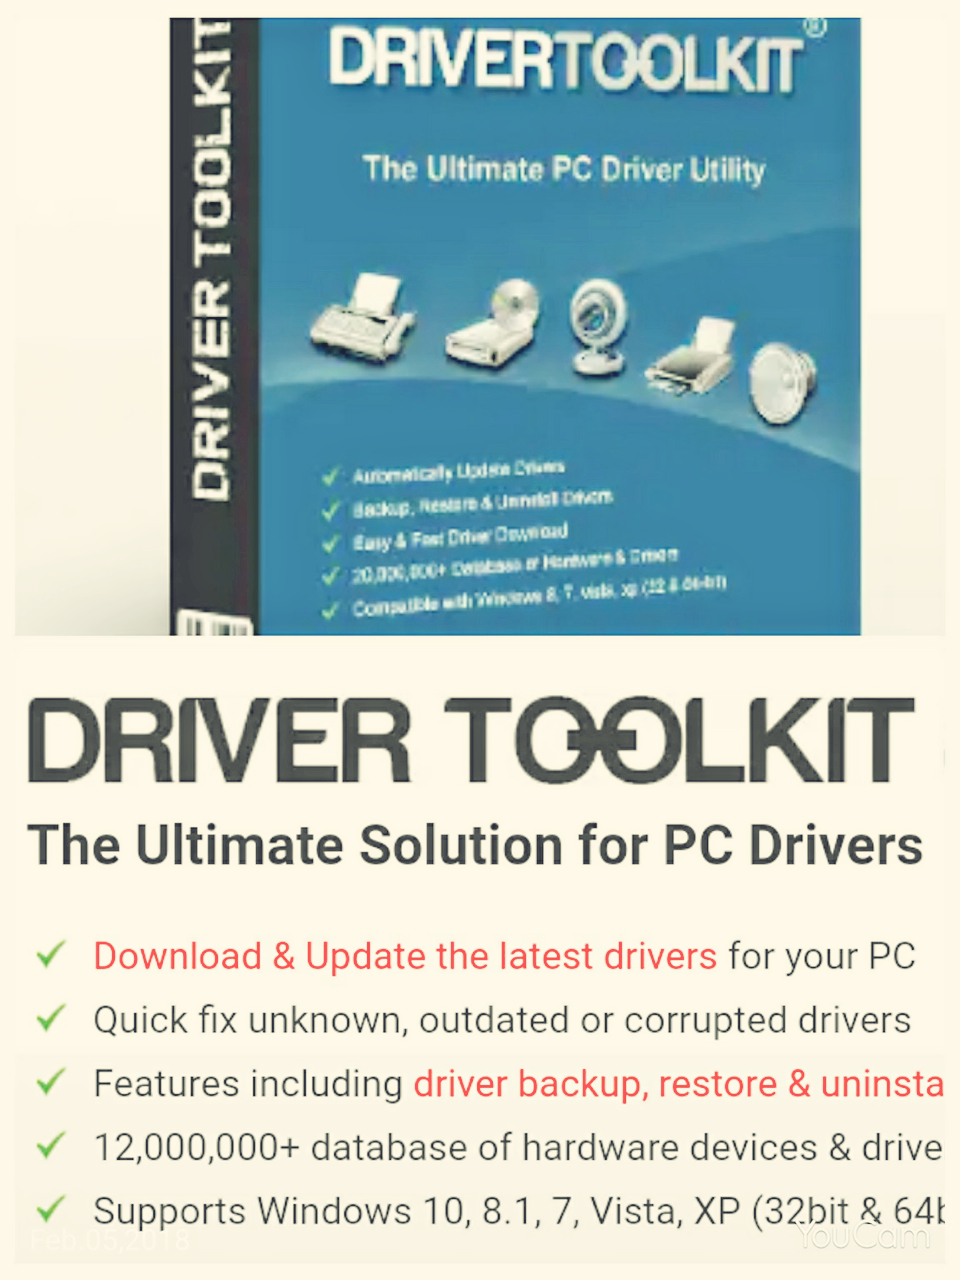 Driver toolkit license key generator free download toy sculpting zbrush